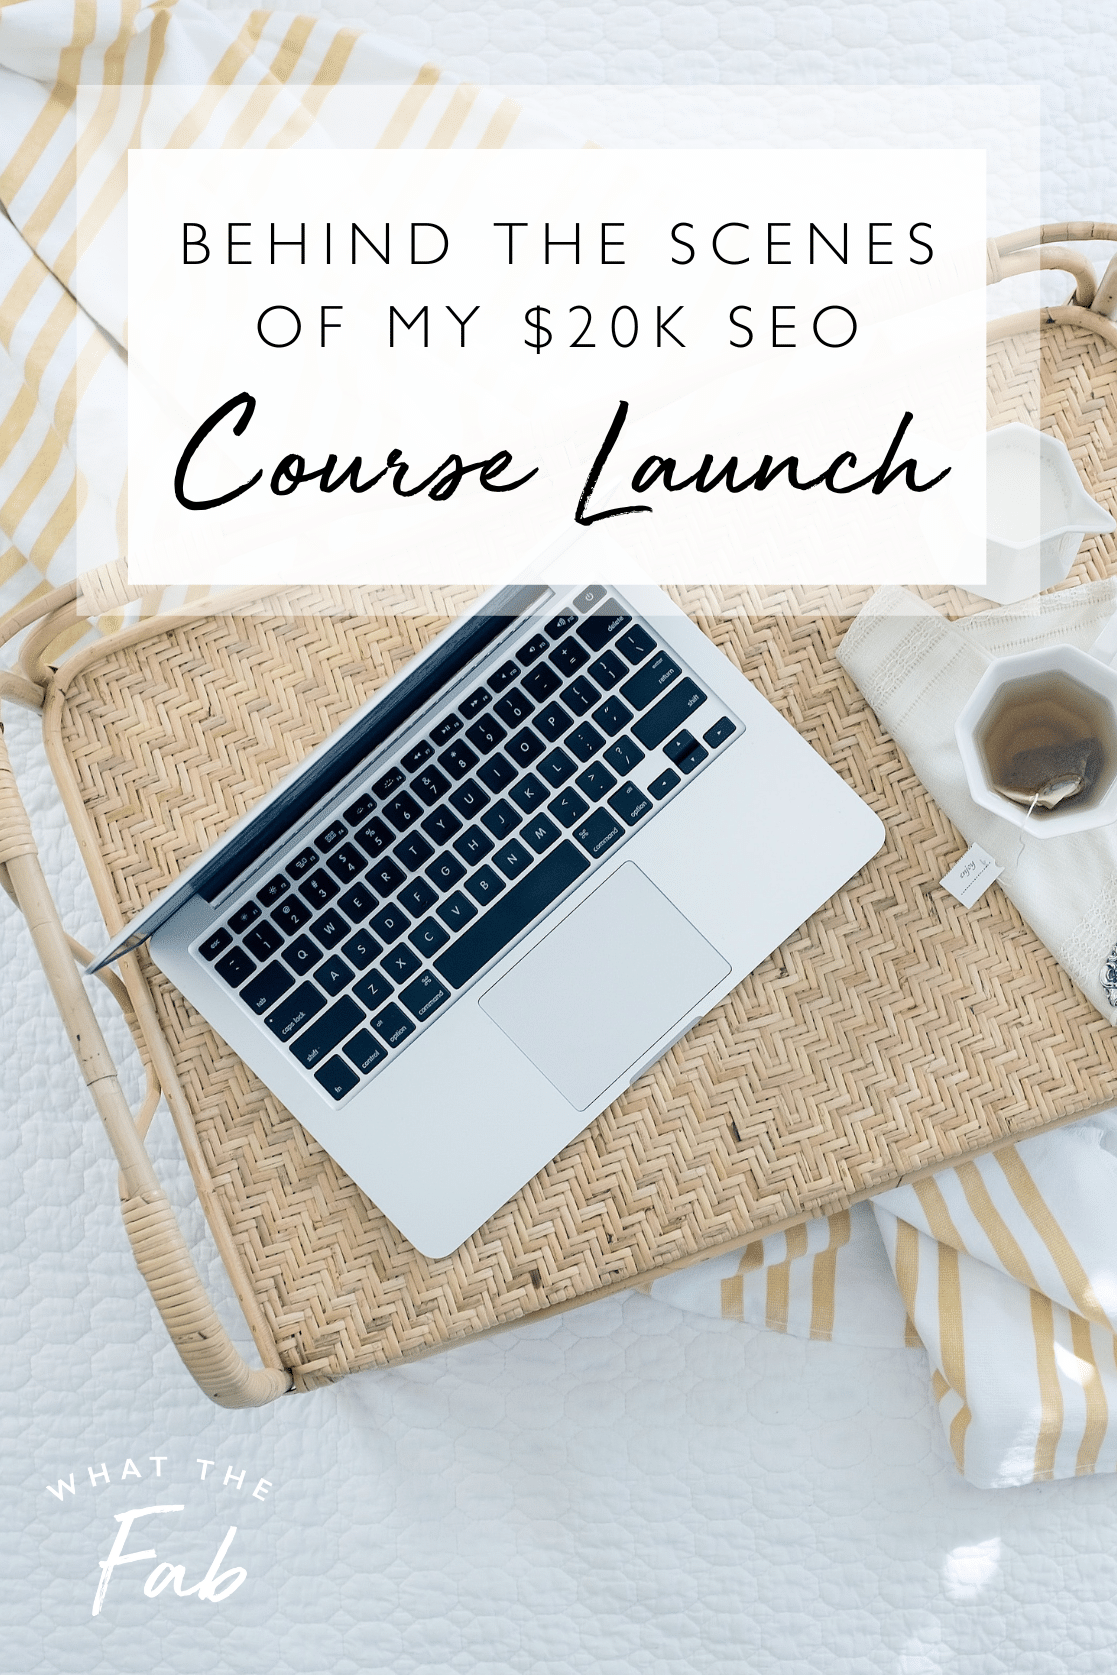 behind the scenes of my $20k seo course launch